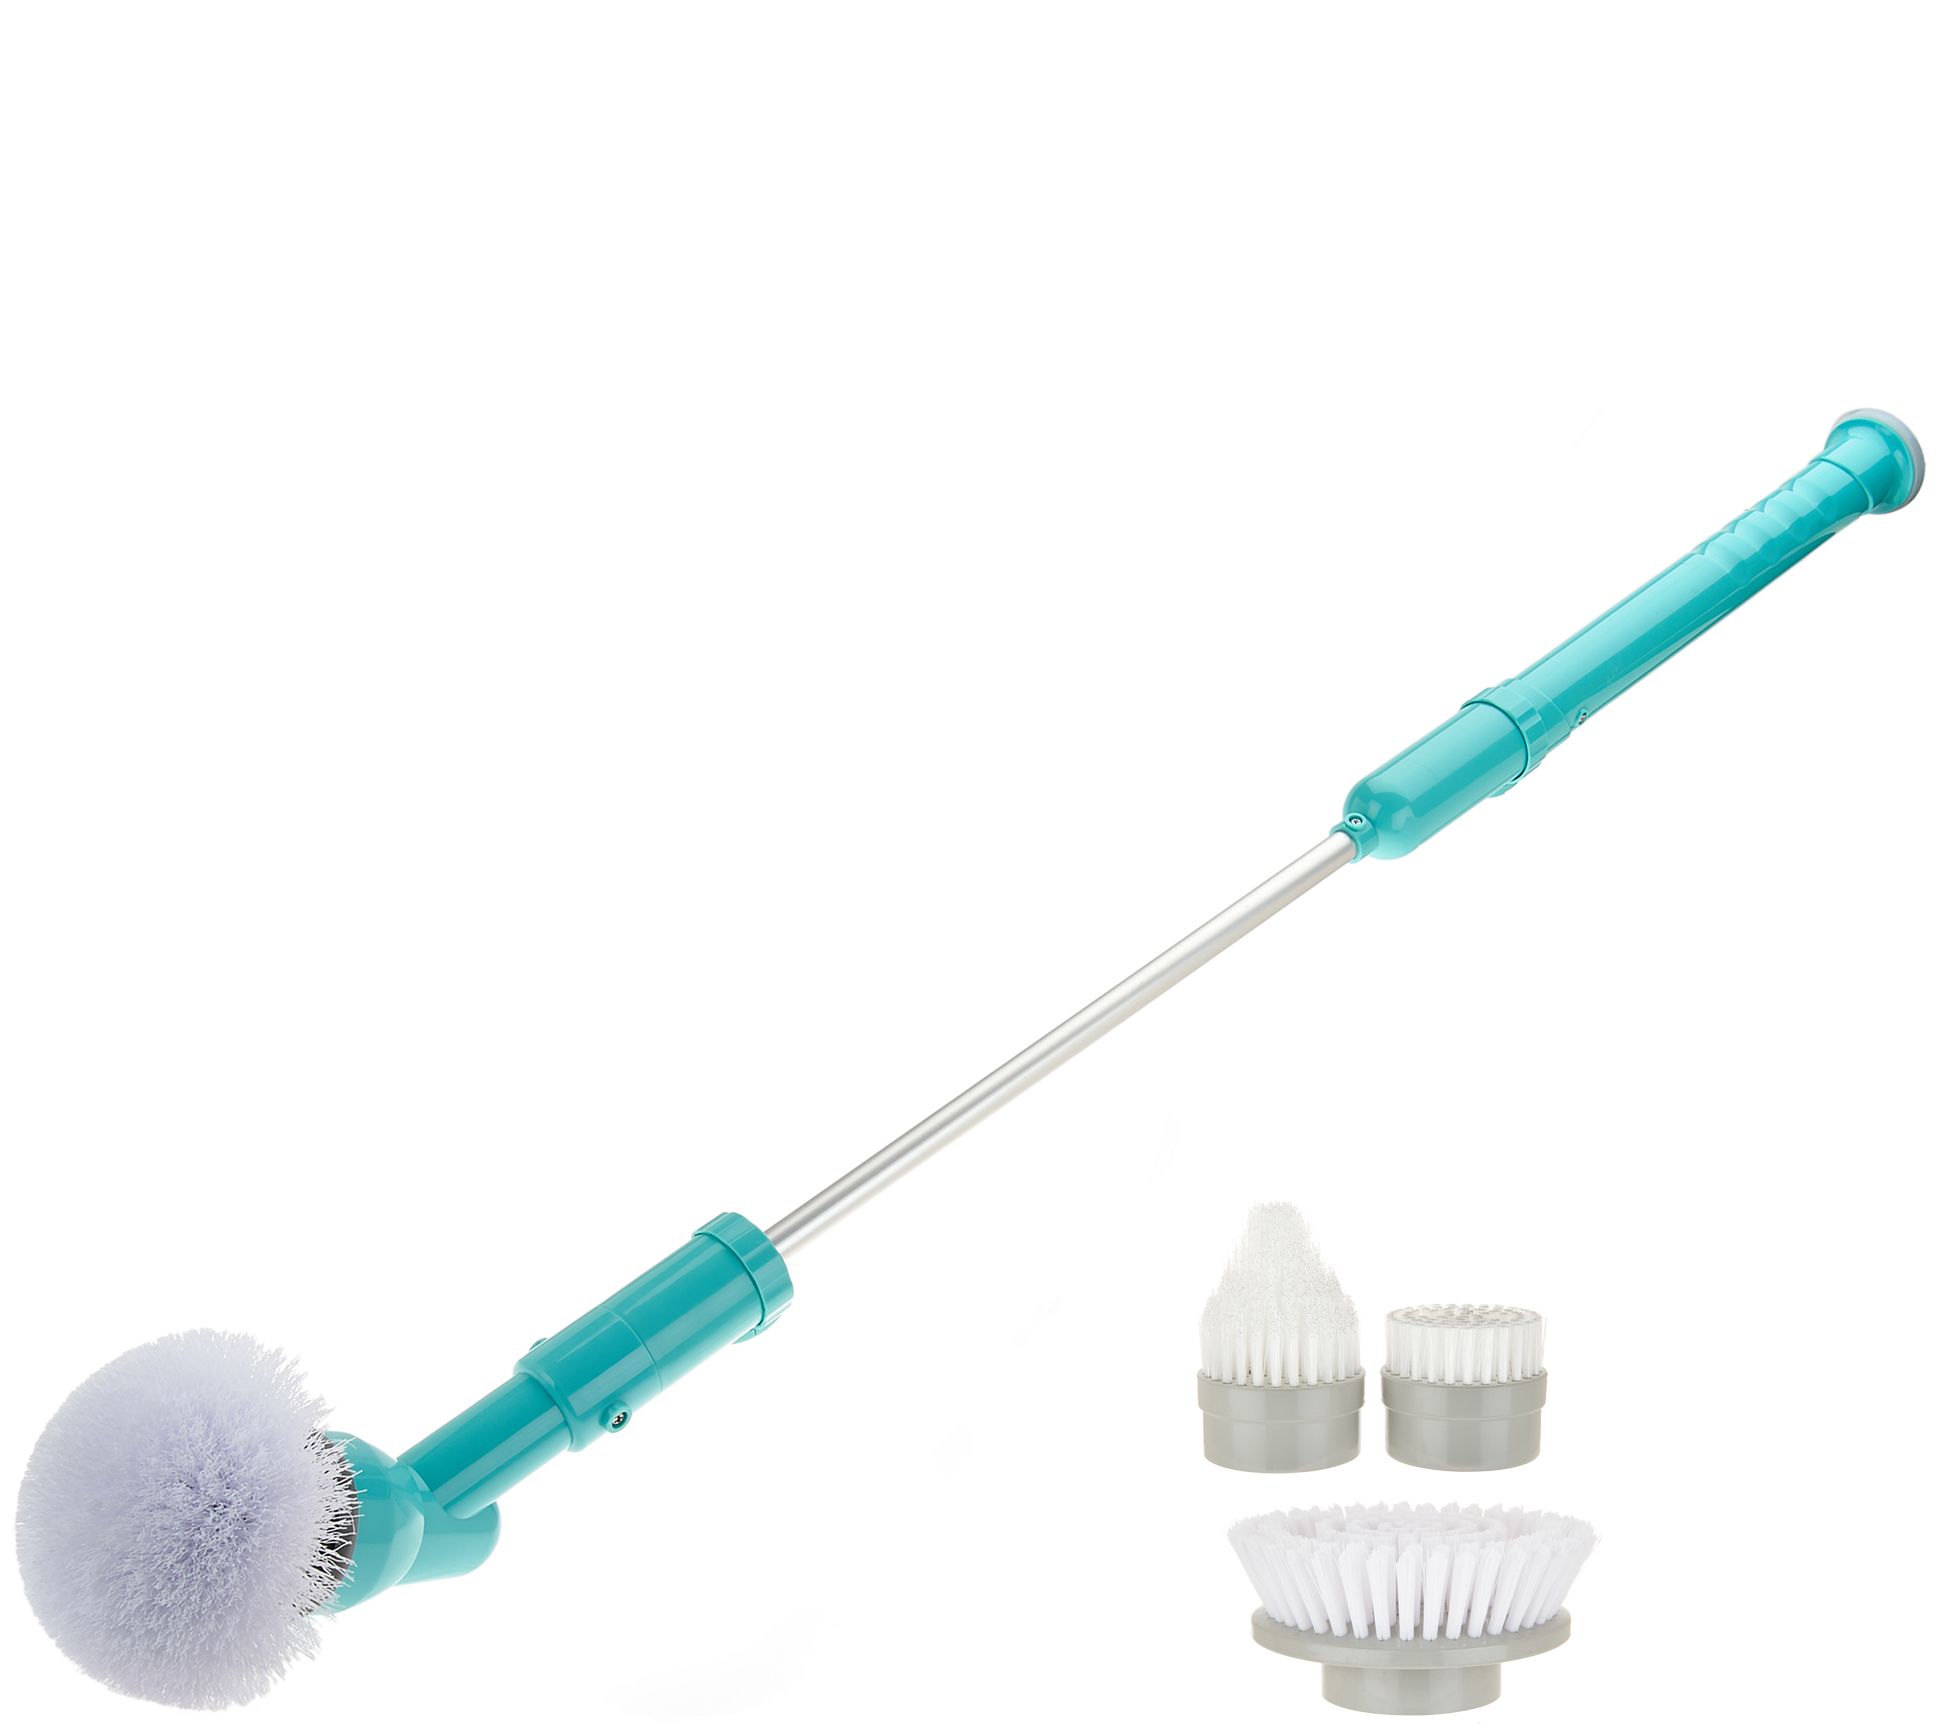 Japan Grout Brush Tile Grout Cleaner Cleaning Tool For Bathroom Kitchen  Shower Sinks Tubs And Other Areas Around Sinks And Tubs